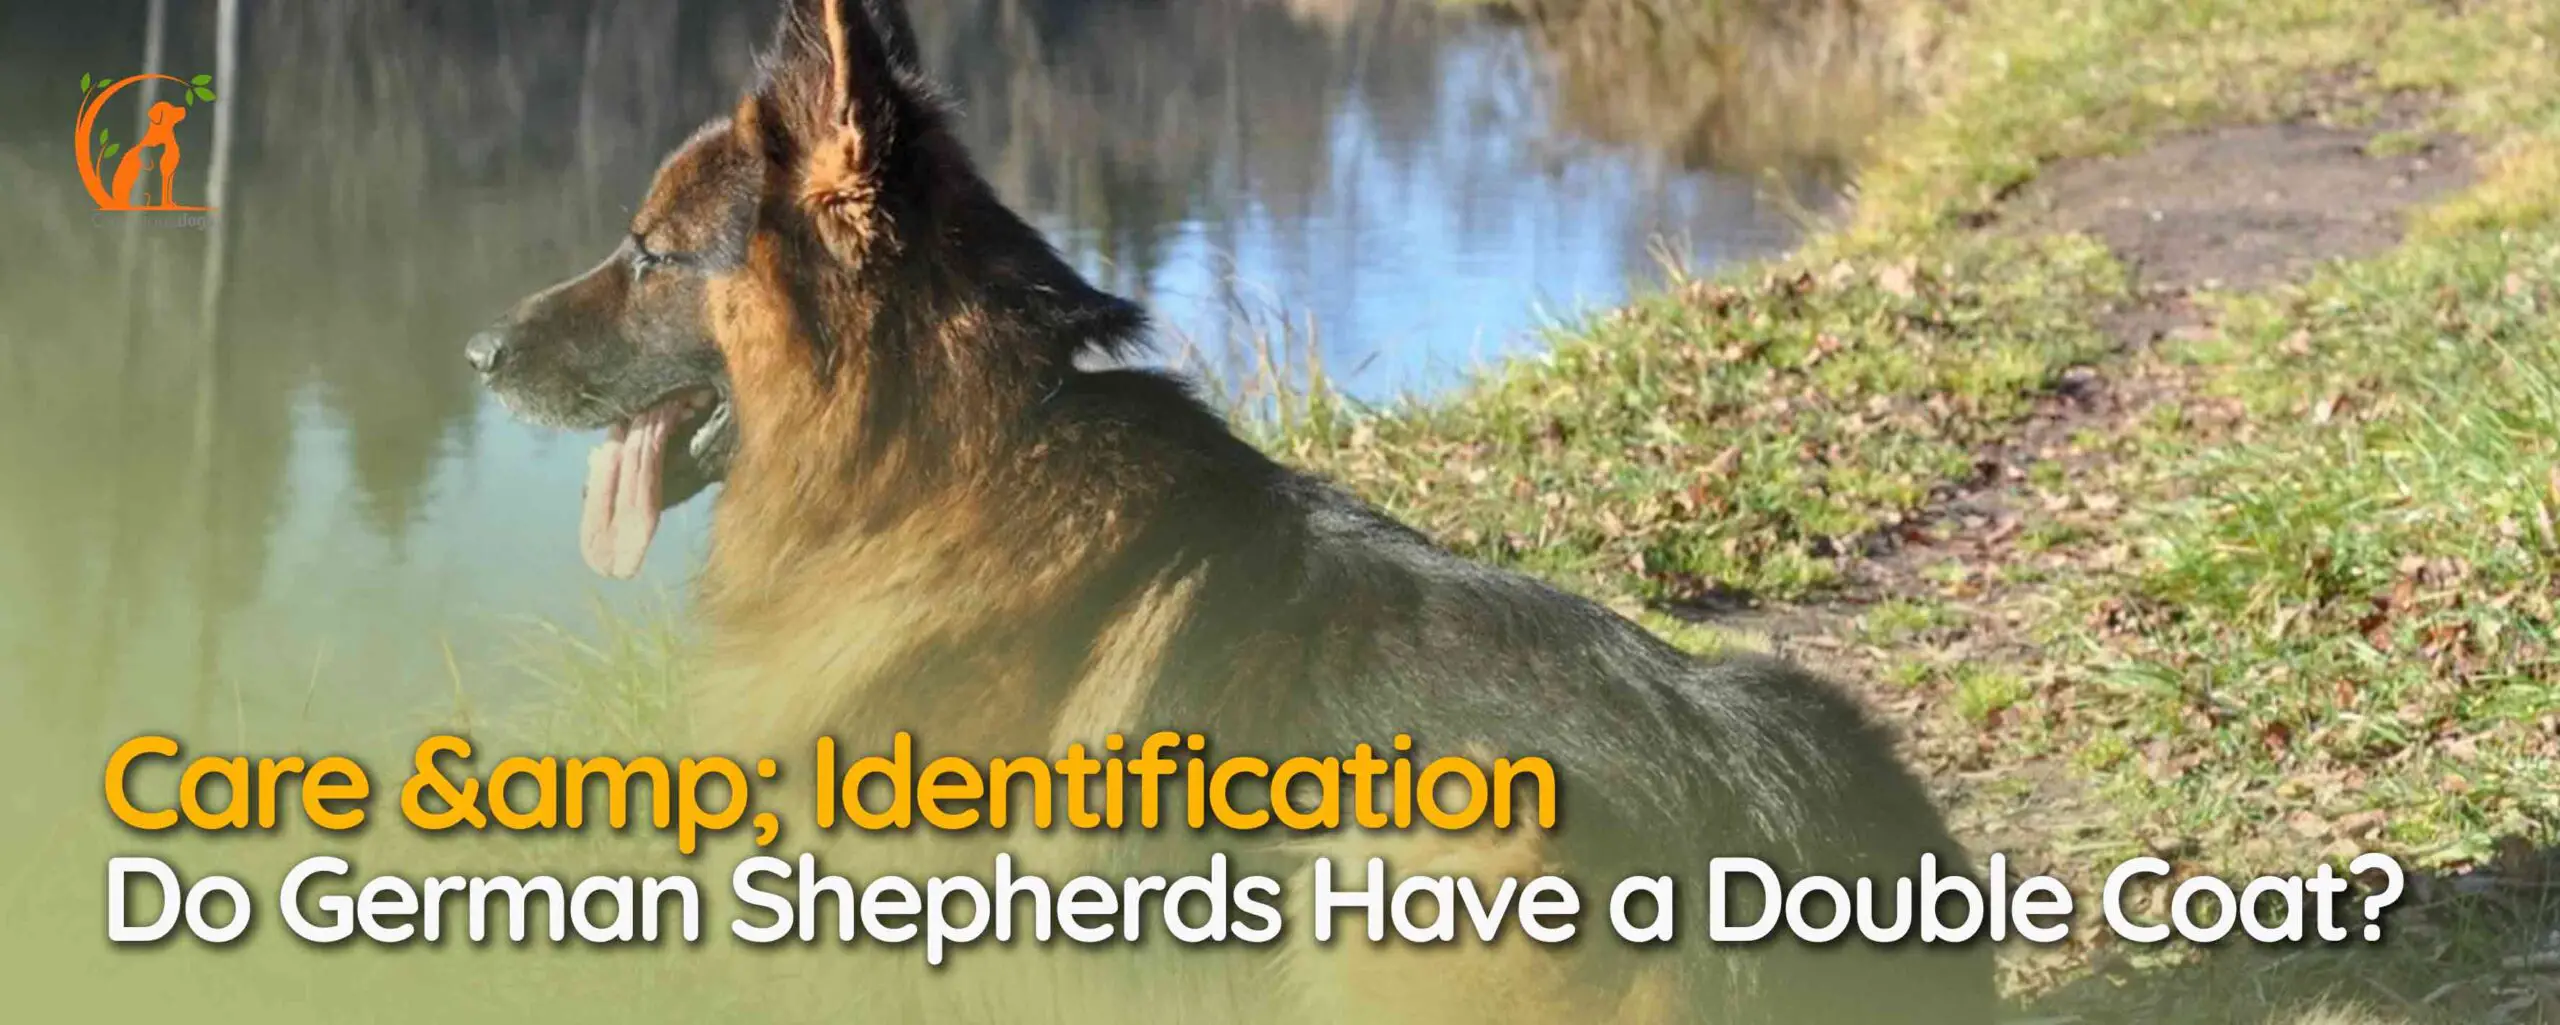 Do German Shepherds Have a Double Coat